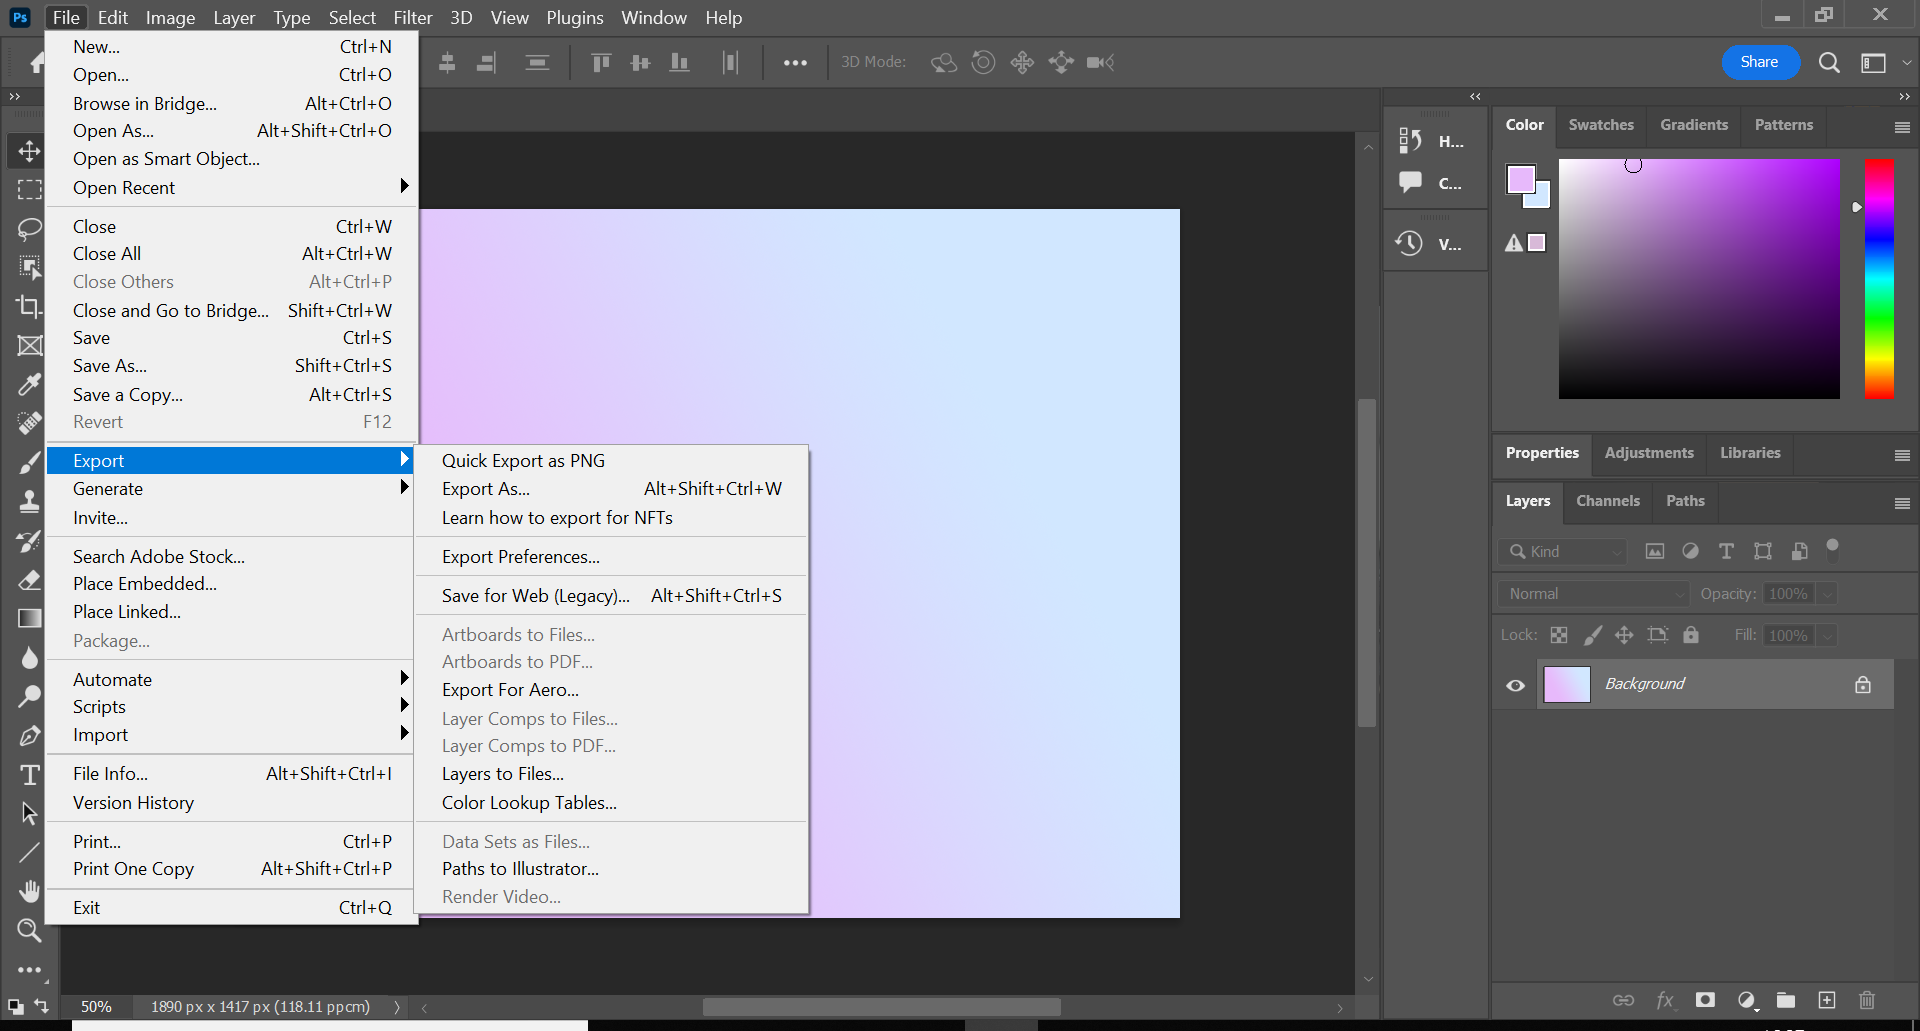 How to export a file as a PNG in Photoshop